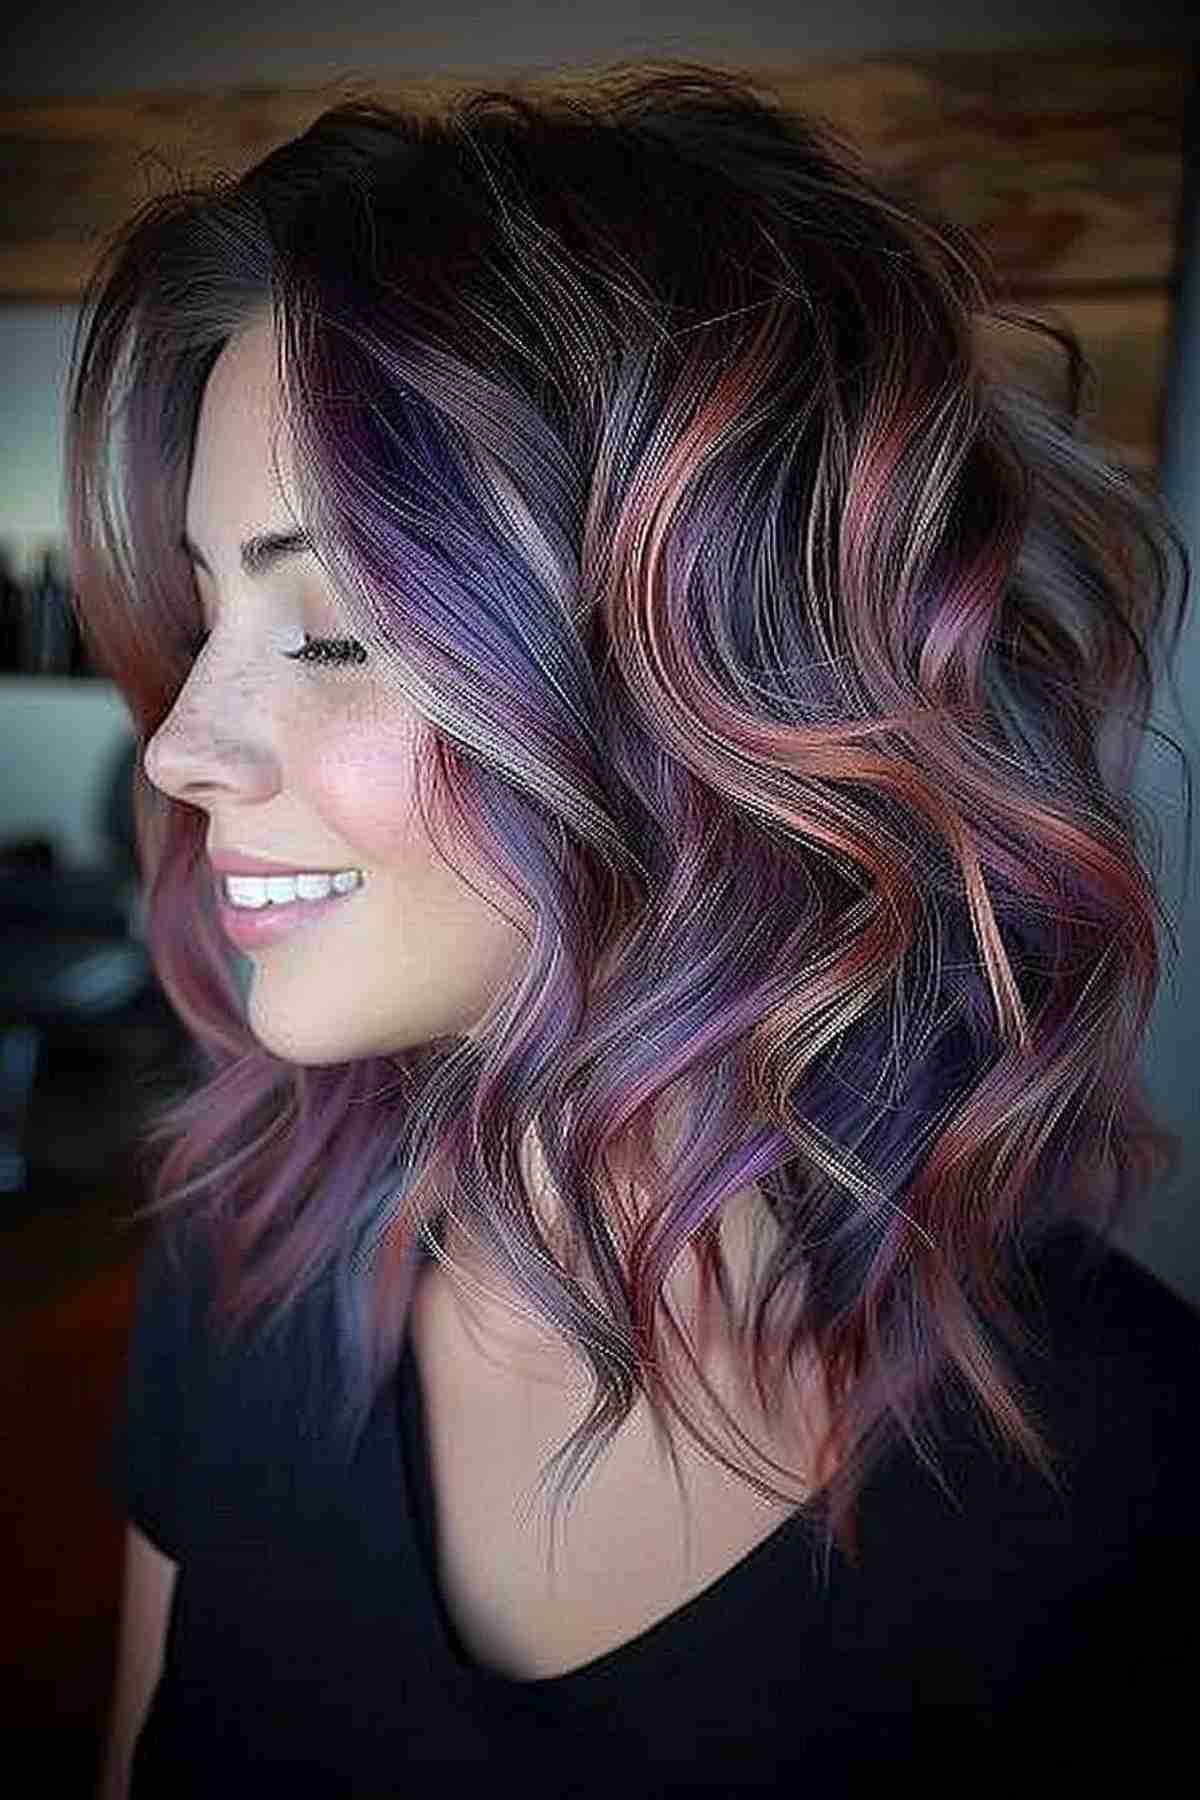 Medium-length wavy lob with a blend of pastel and deep metallic rainbow colors.